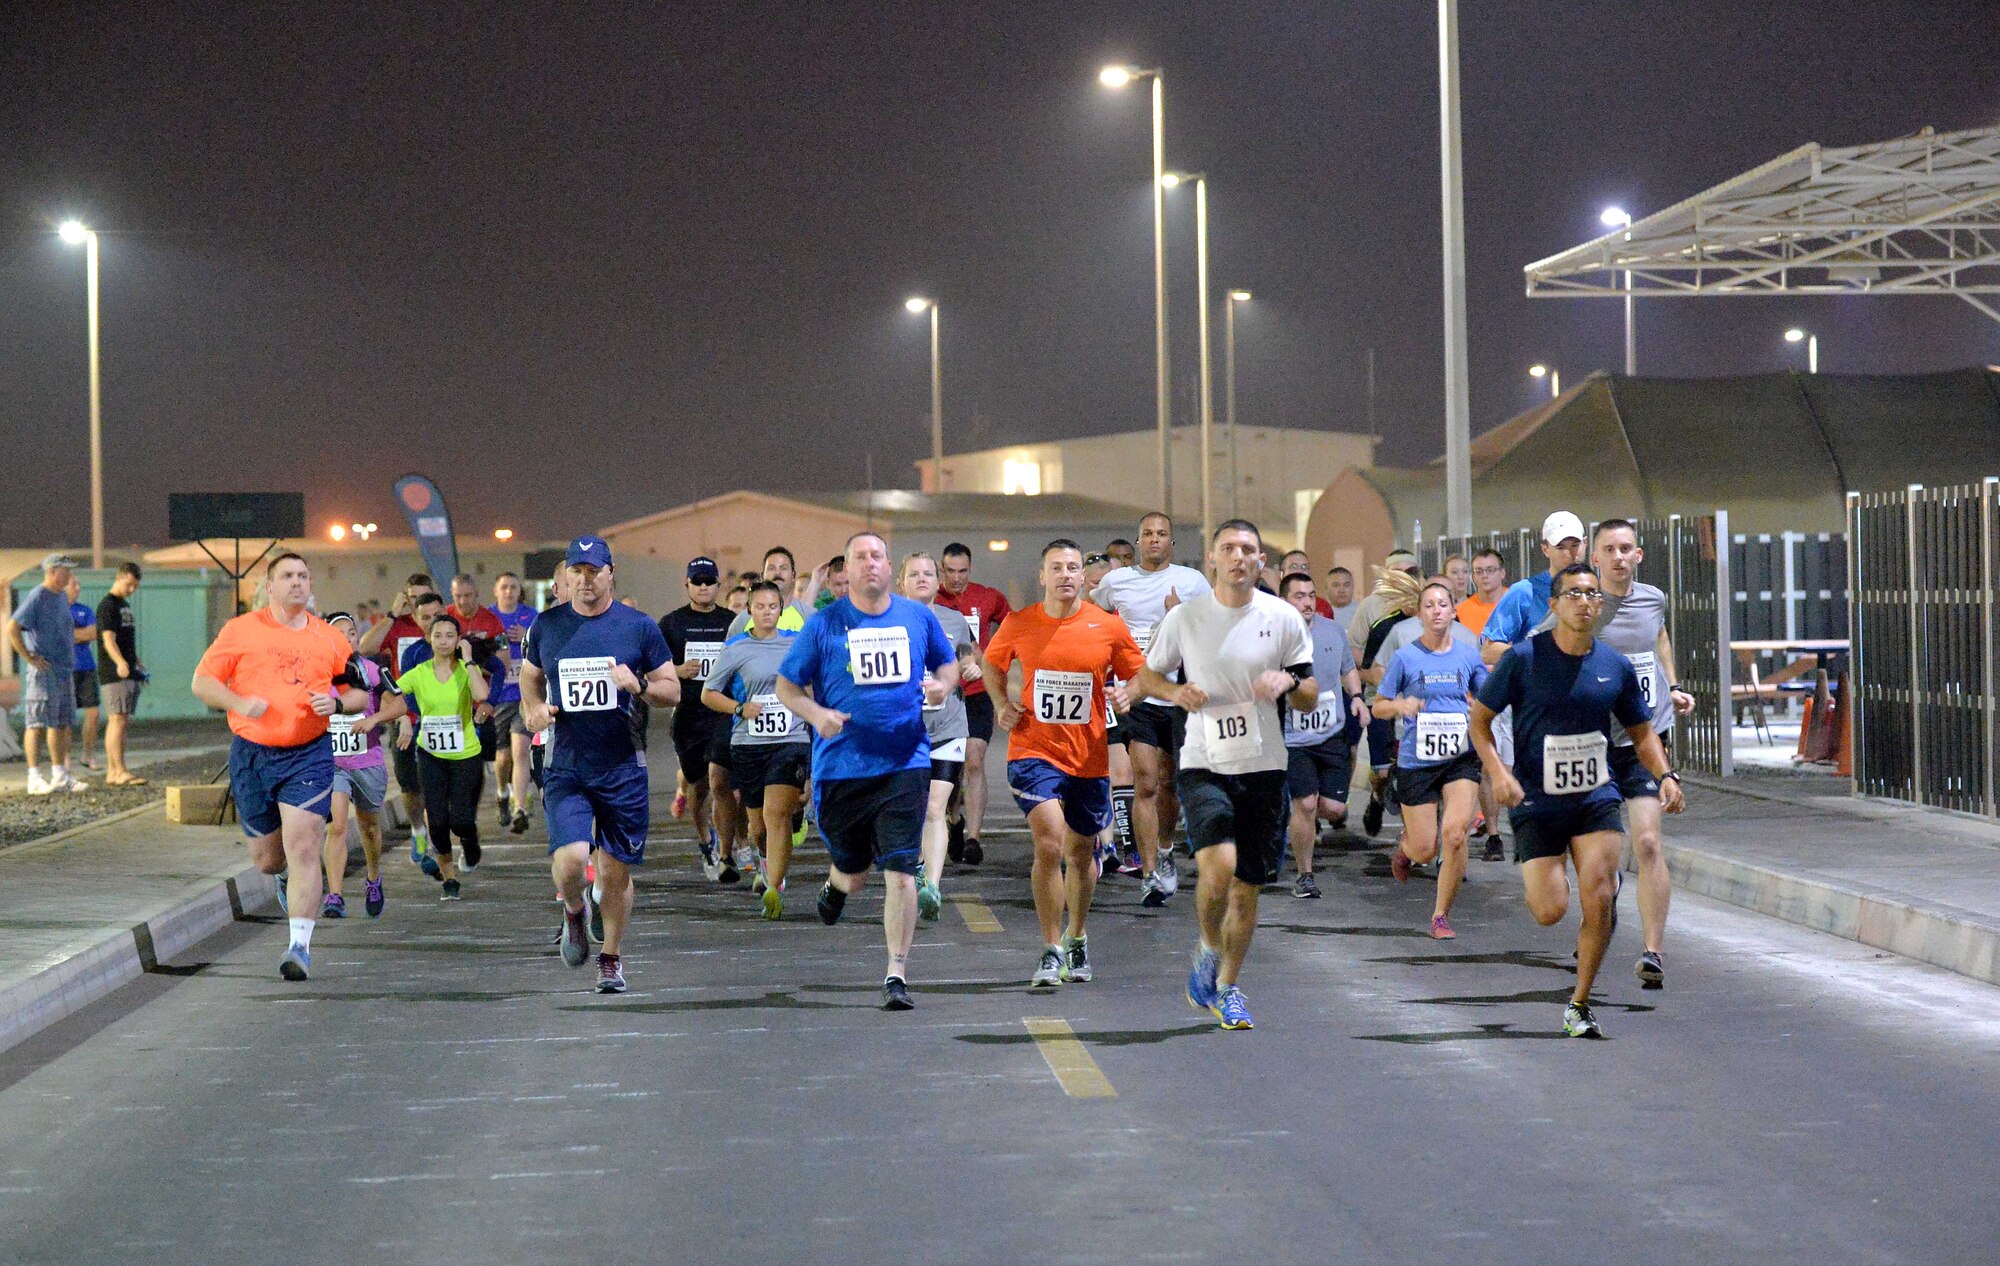 Runners begin the Air Force 10K at an undisclosed location in Southwest Asia Sept. 19, 2015. The run was held in light of the Air Force’s 68th birthday. (U.S. Air Force photo/Tech. Sgt. Jeff Andrejcik)